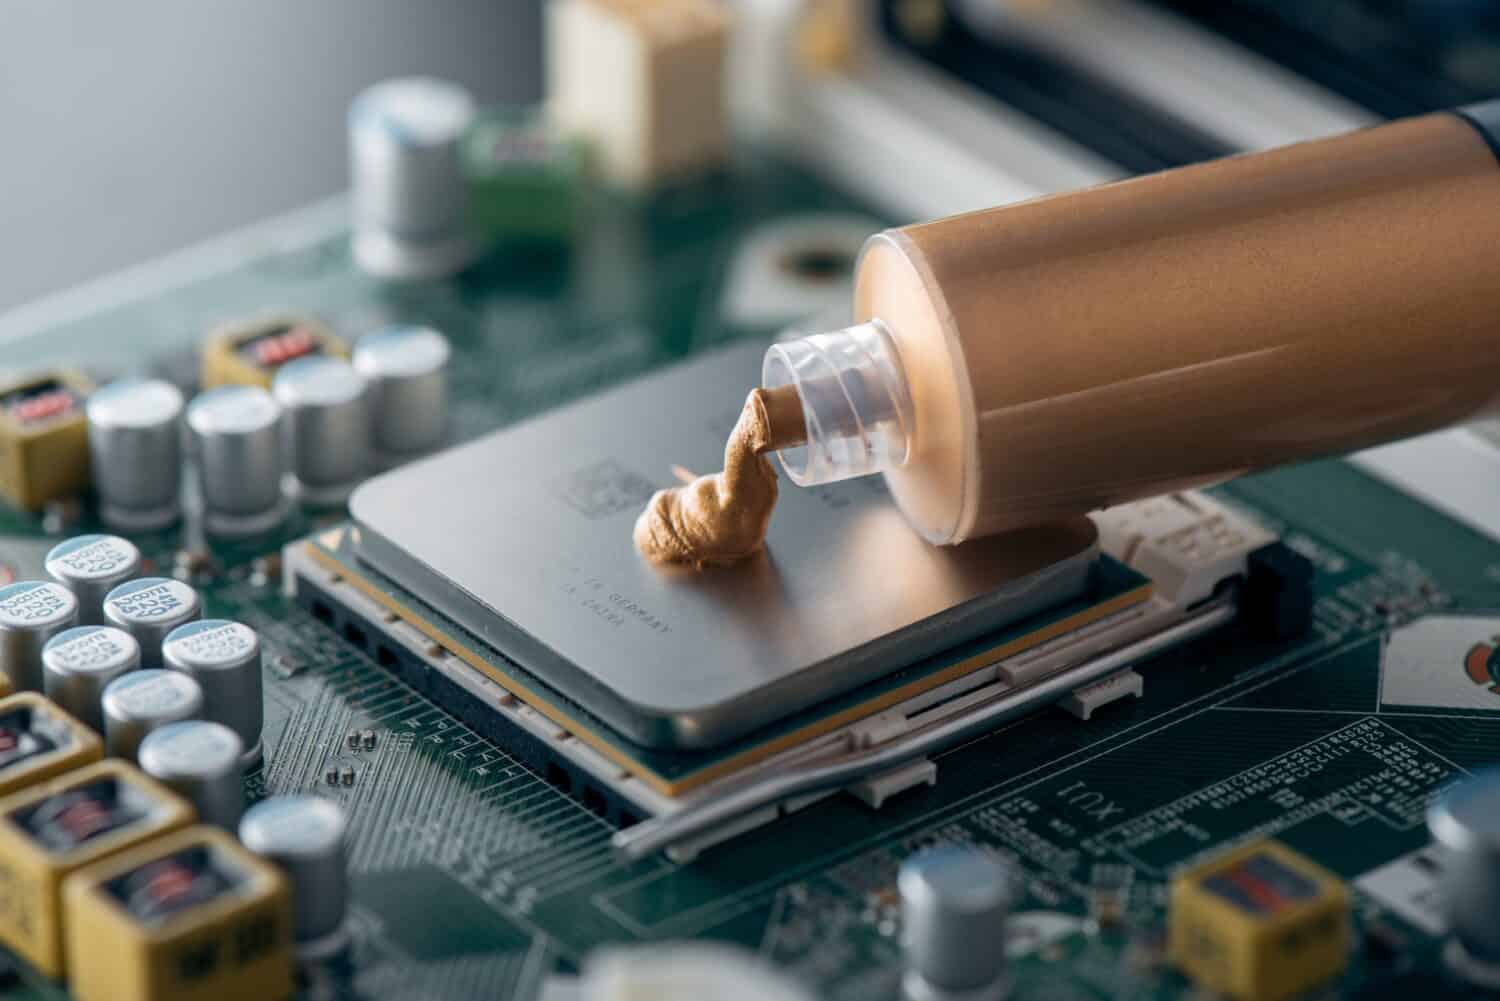 <p>If you recently installed a new CPU, there's a chance it isn't making full contact with all the pins. It could also be overheating due to insufficient thermal paste. So, you may be able to fix your frozen computer by removing the CPU, removing the old thermal paste, and re-applying the new thermal paste. You can now reinstall your CPU again and see if any freezing issues are now resolved. </p>    <p>Just remember that when tinkering with your CPU and thermal paste, go slowly as the pins can break. Don't try to force or jam it into the CPU bracket. If it's angled correctly, it should fall right into place. </p><p><span>Would you please let us know what you think about our content? <p>Agree? Tell us by clicking the “Thumbs Up” button above.</p> Disagree? Leave a comment telling us what you’d change.</span></p>